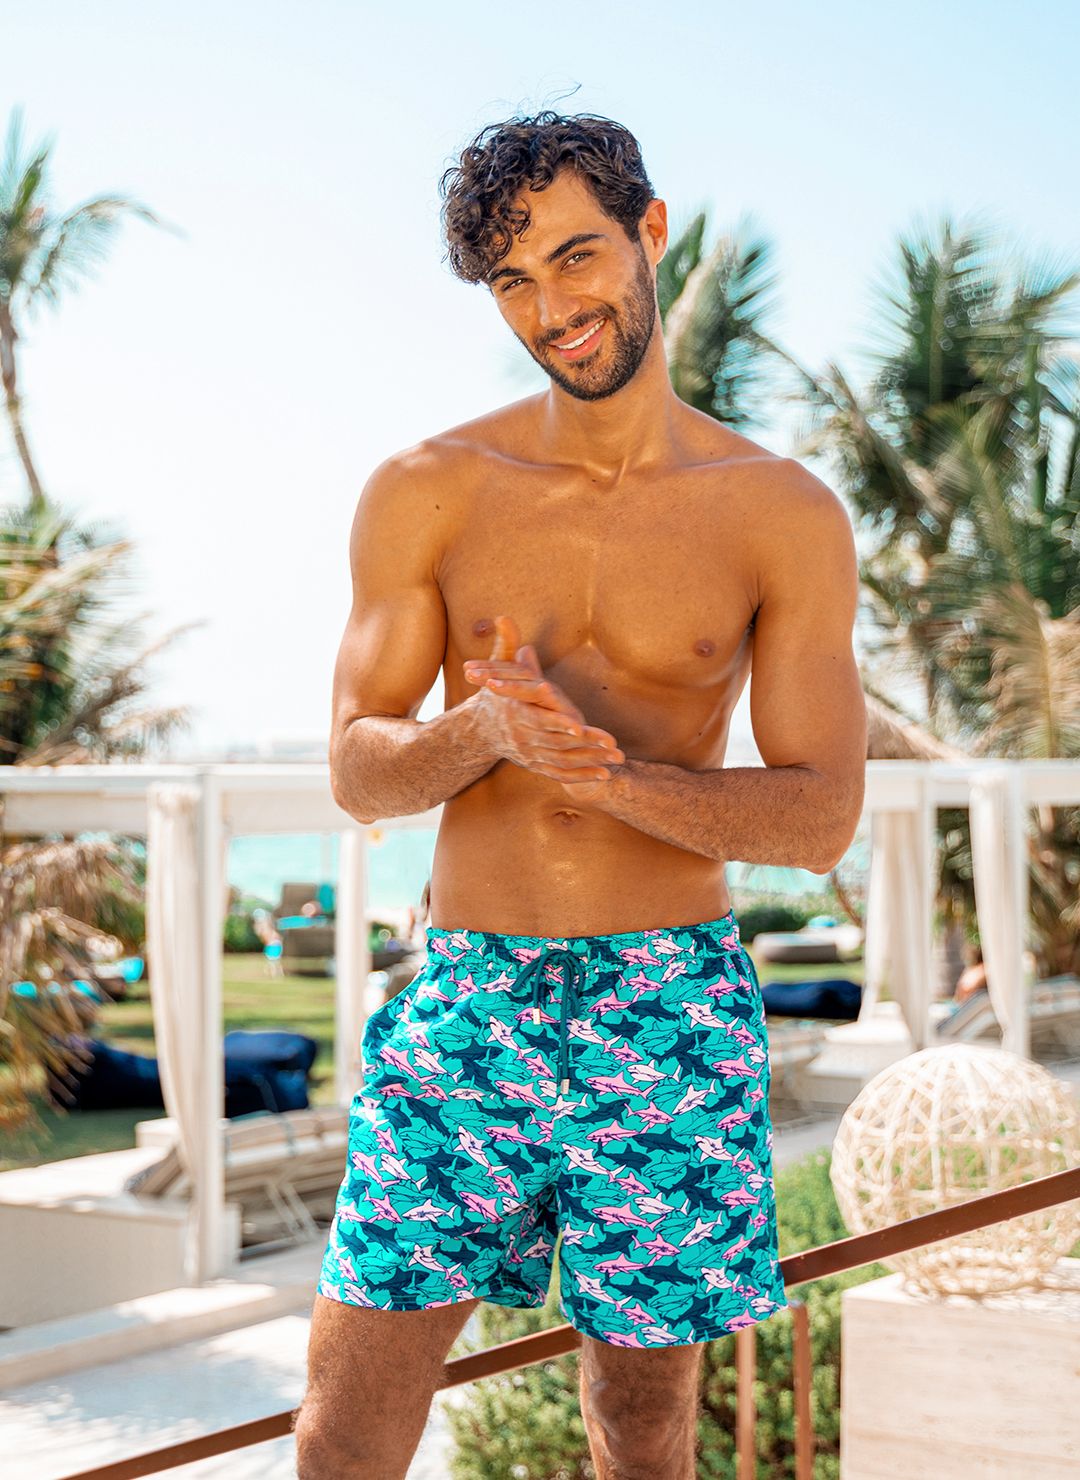 The Az are essential CAHA CAPO boardshorts in Shark print. Part of the CAHA CAPO men's swimwear collection.